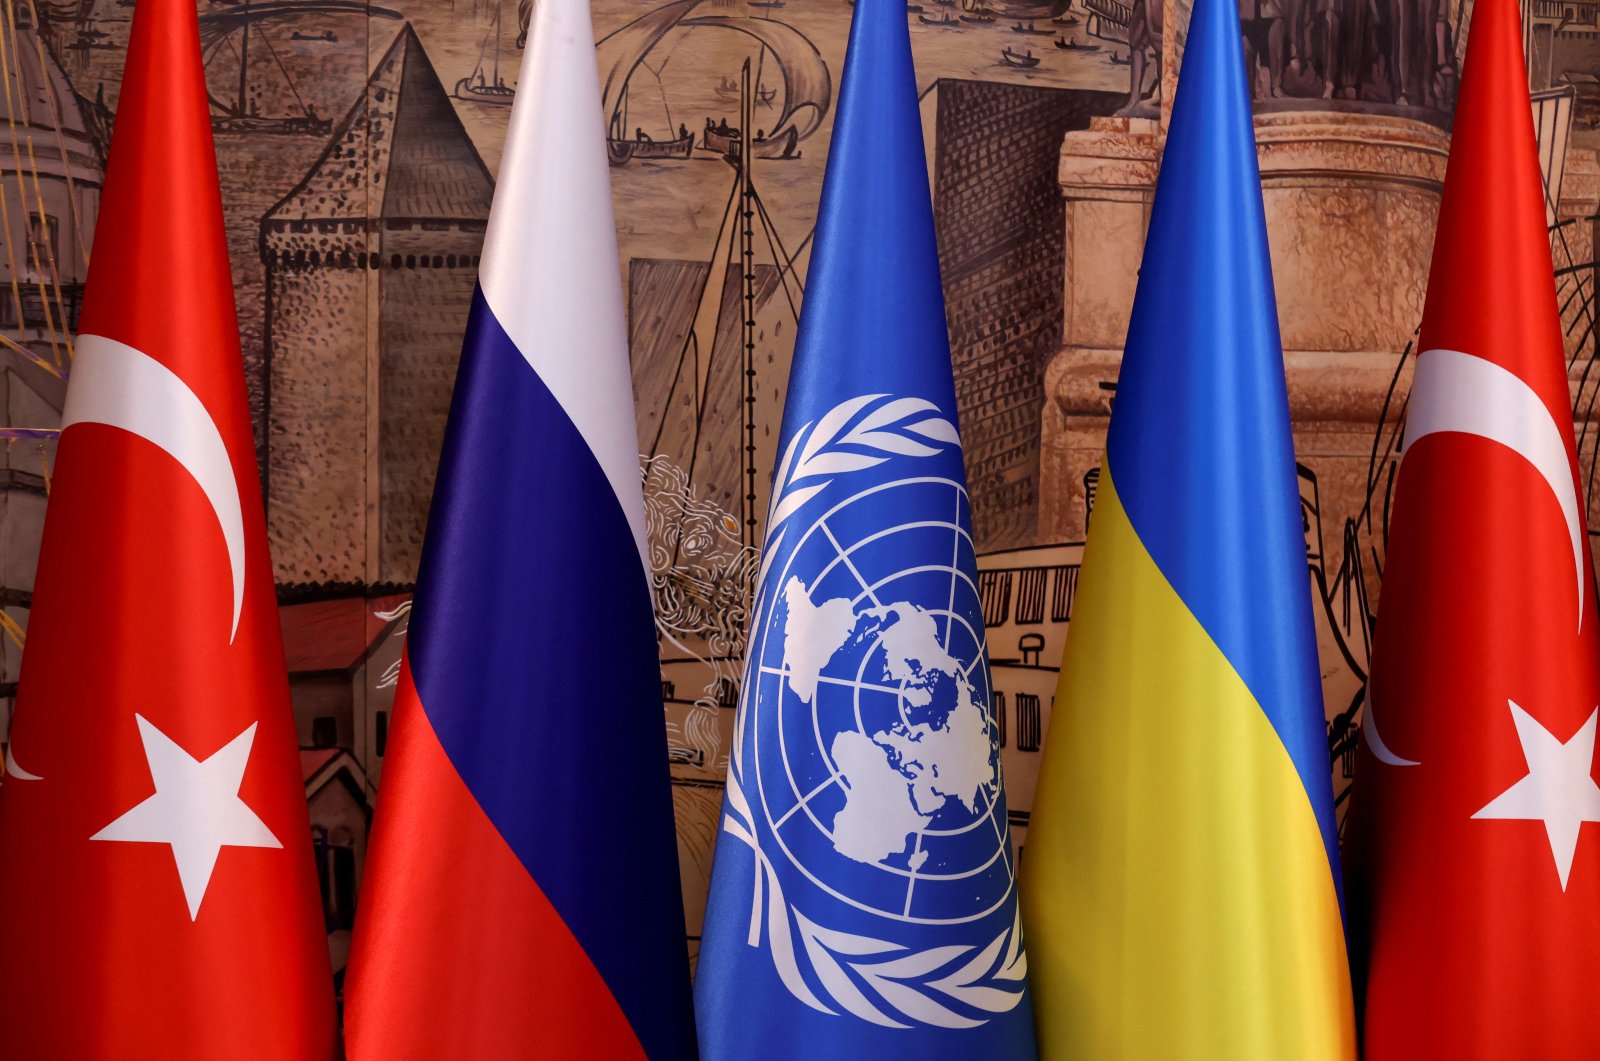 Flags of Turkey, Russia, the United Nations and Ukraine are seen on the day of a signing ceremony in Istanbul, Turkey, July 22, 2022. (Reuters Photo)